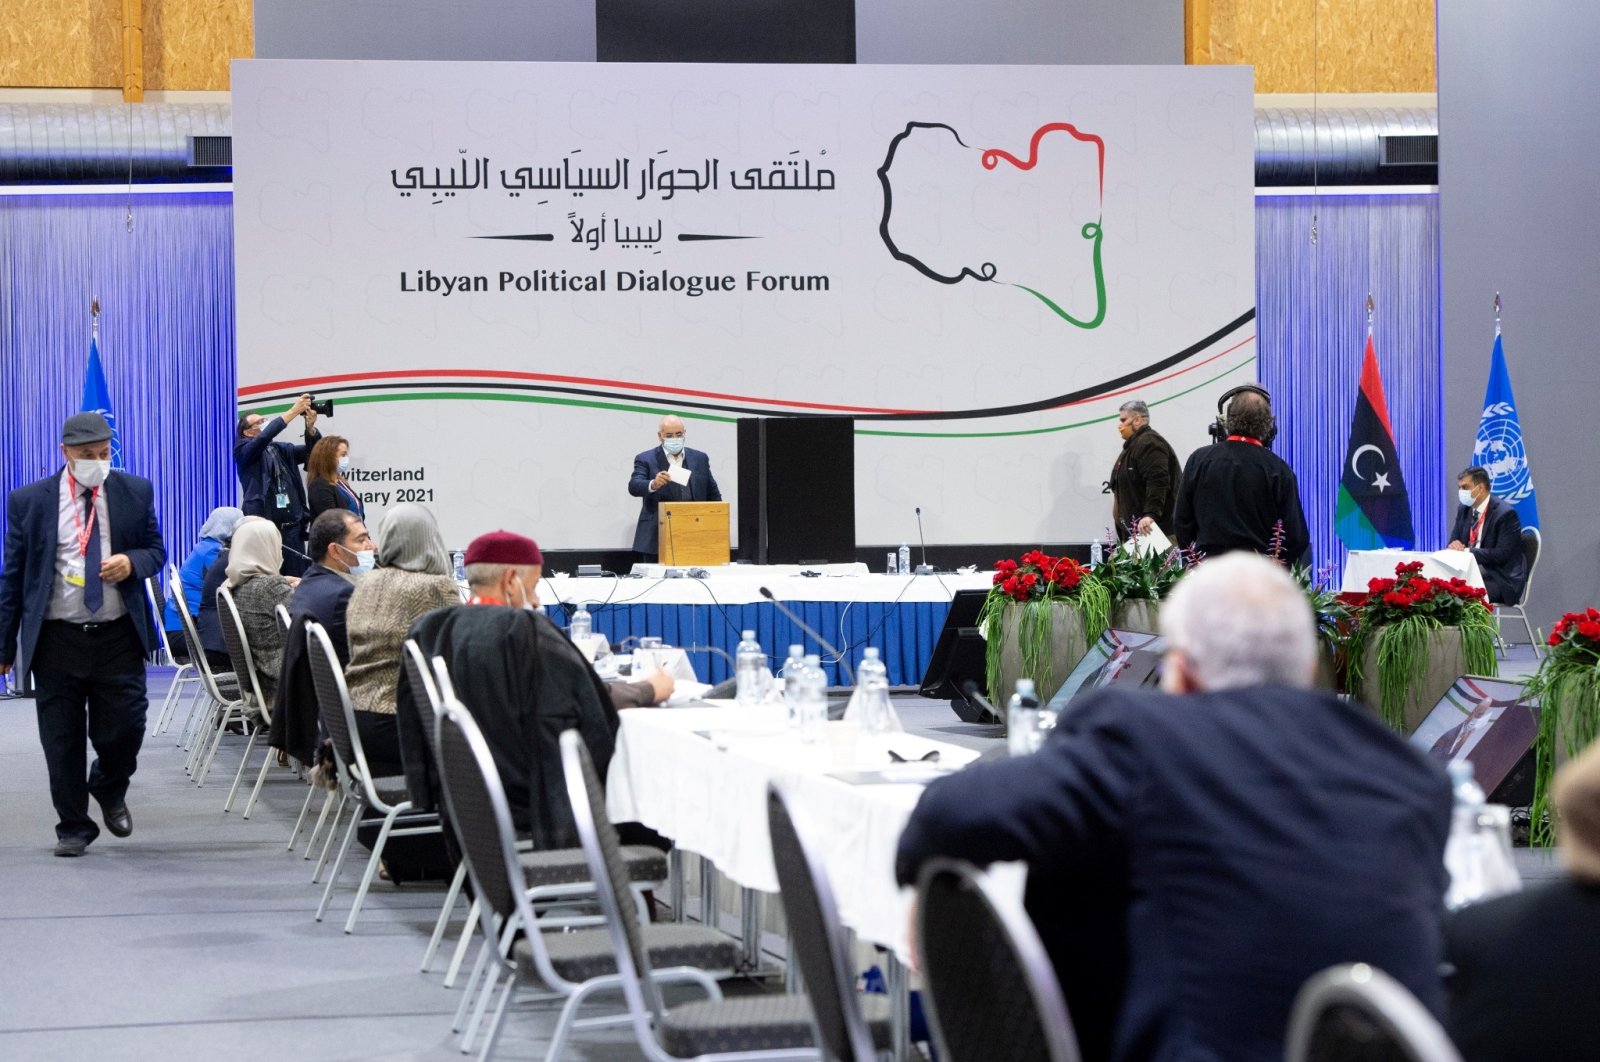 Delegates cast their vote for the election of a new interim government for Libya during the Libyan Political Dialogue Forum in Chavannes-de-Bogis near Geneva, Switzerland, Feb. 5, 2021. (Reuters Photo)